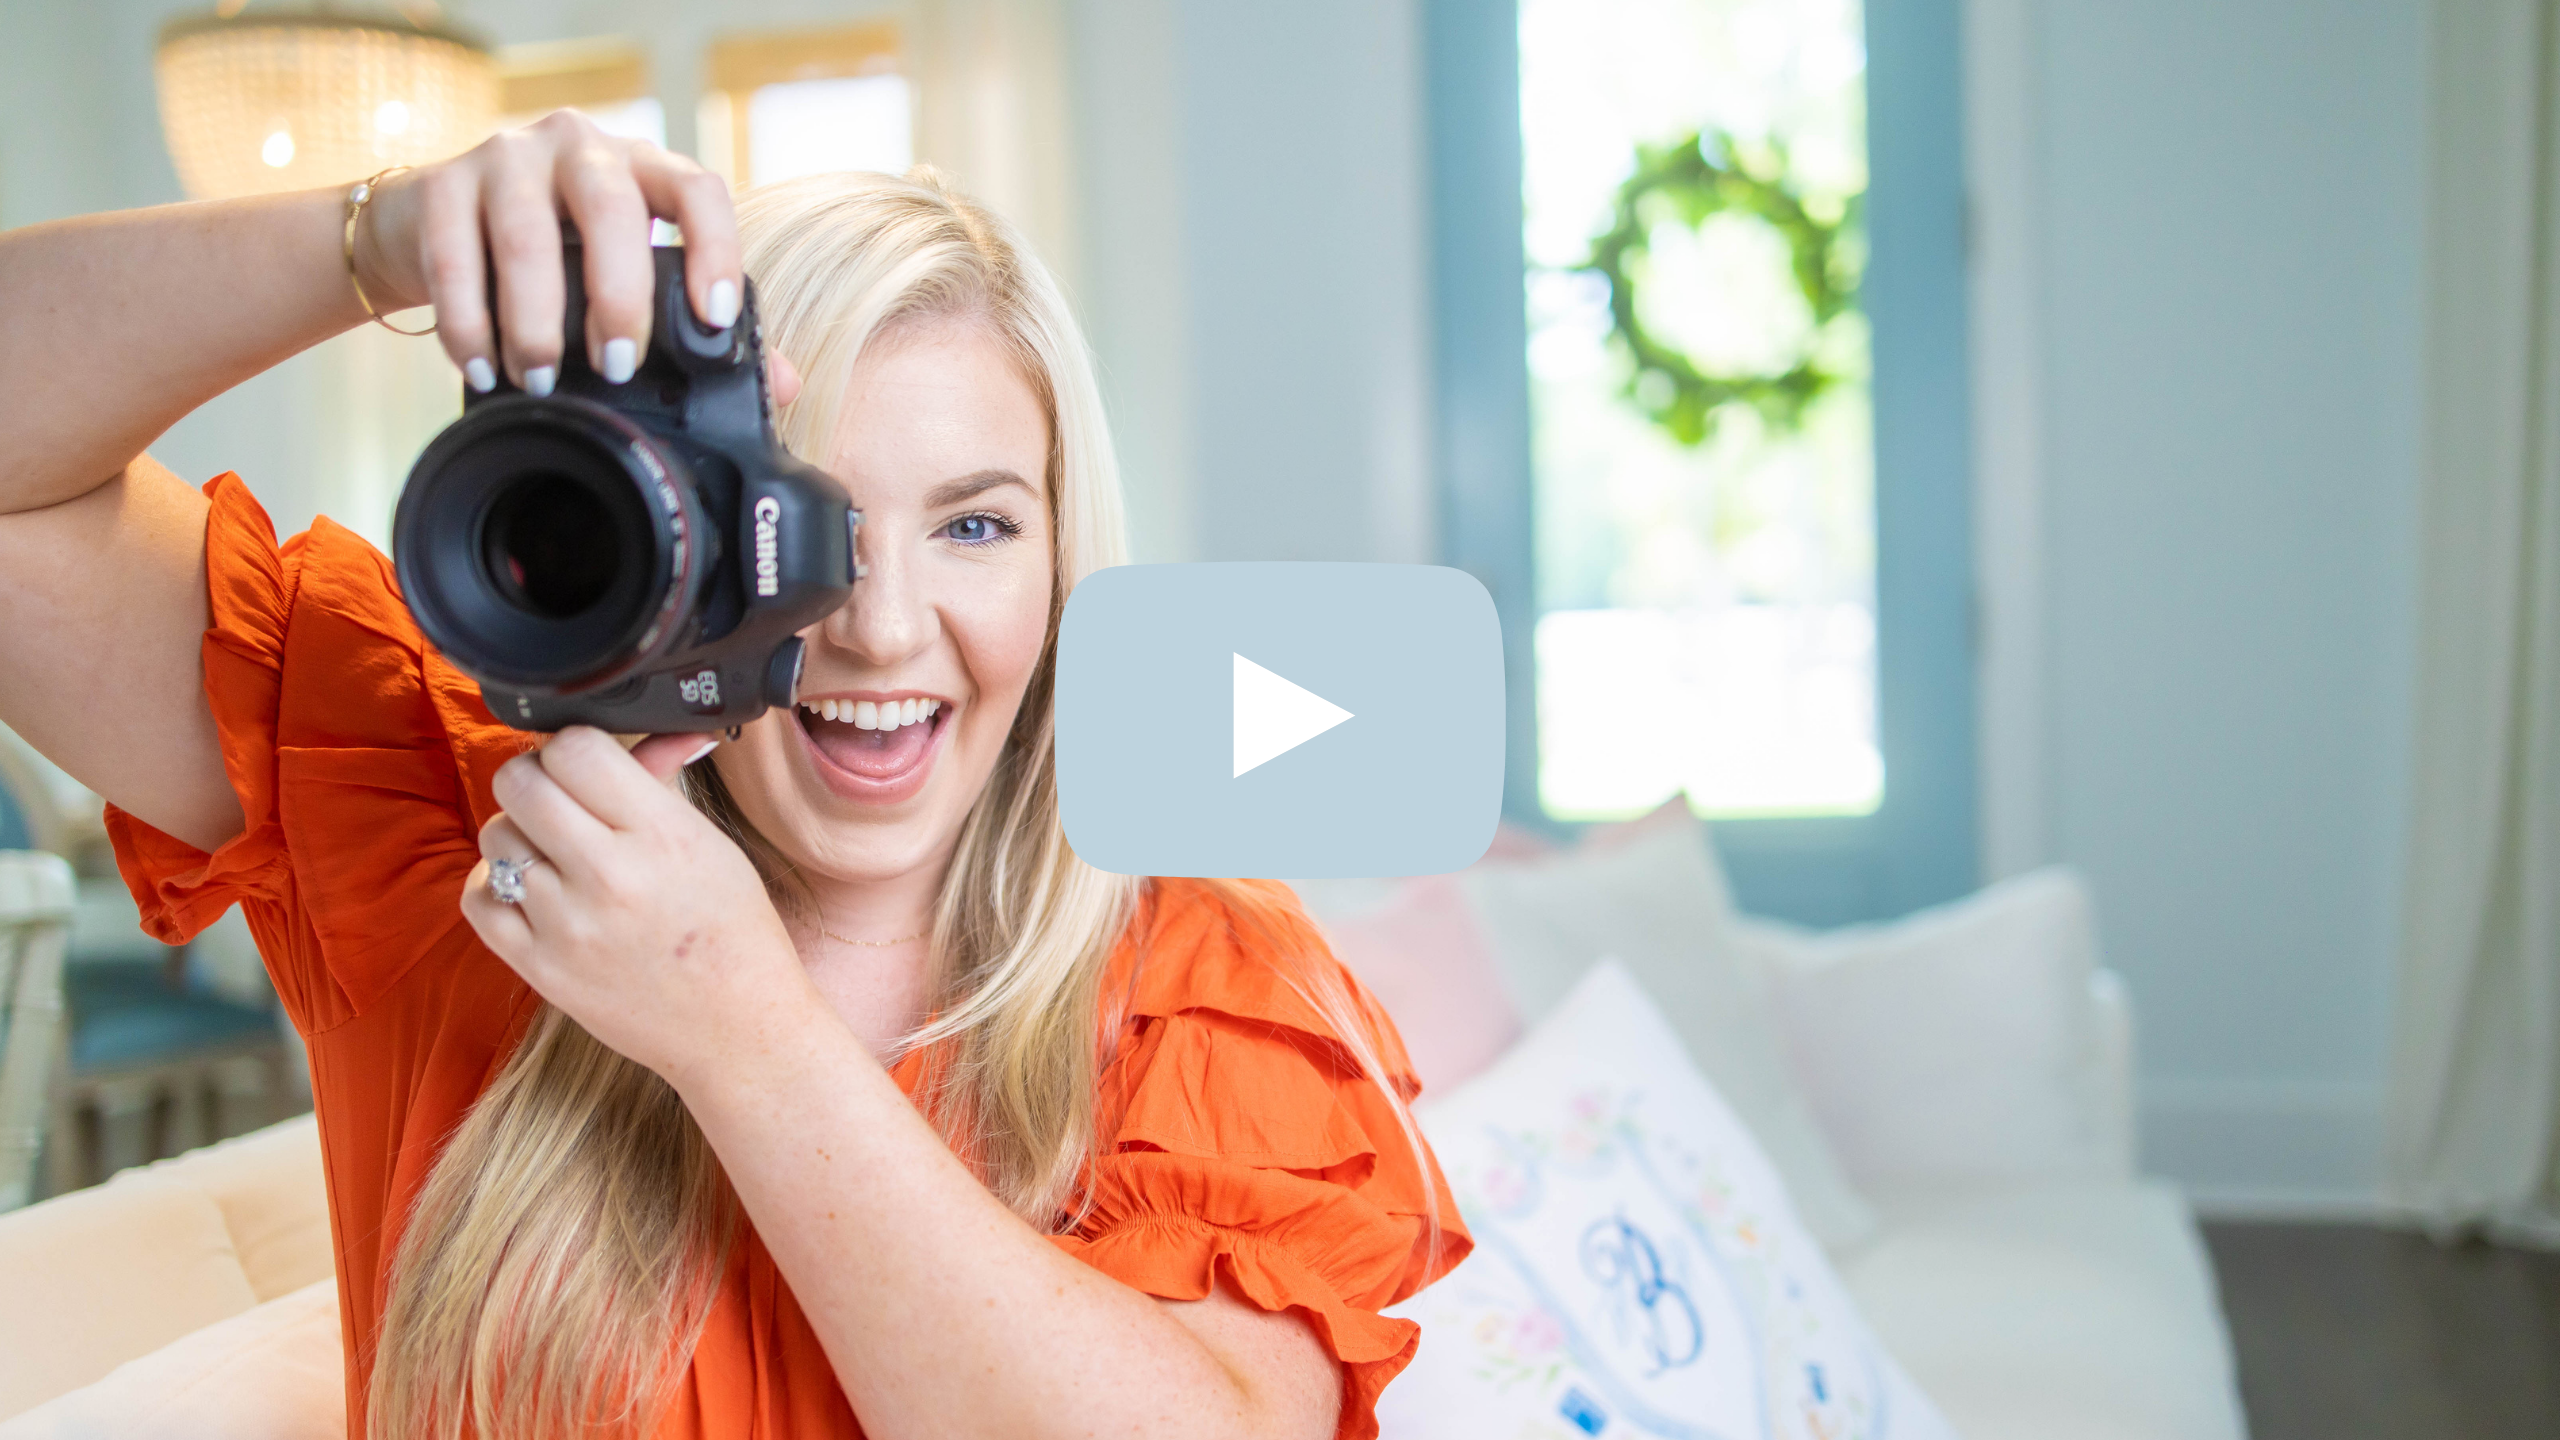 Moving Your Photography Business: What I’m Doing NOW to Prepare | Hope Taylor Photography